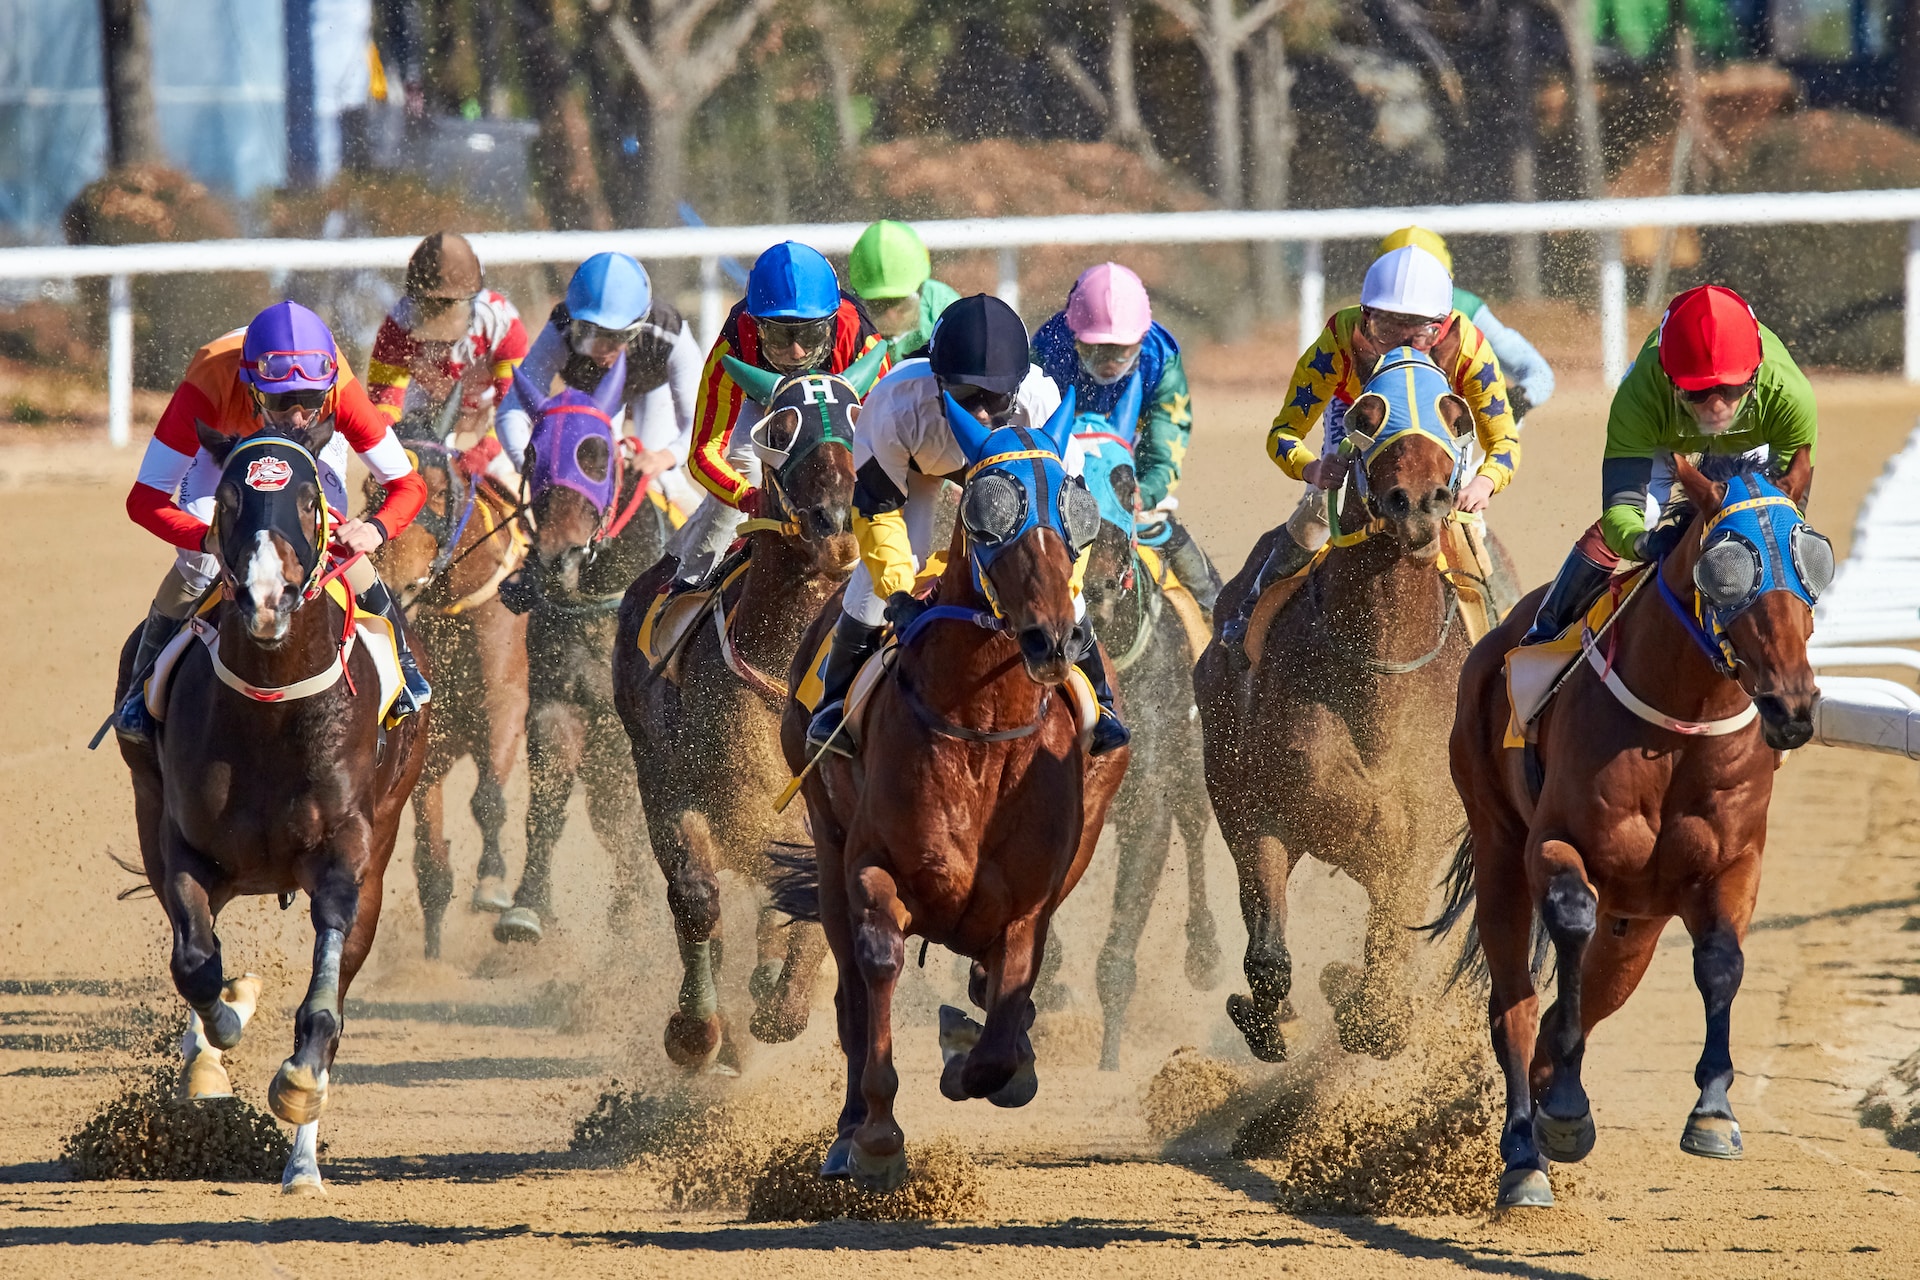 Trifecta Horse Race - An Exciting Betting Opportunity